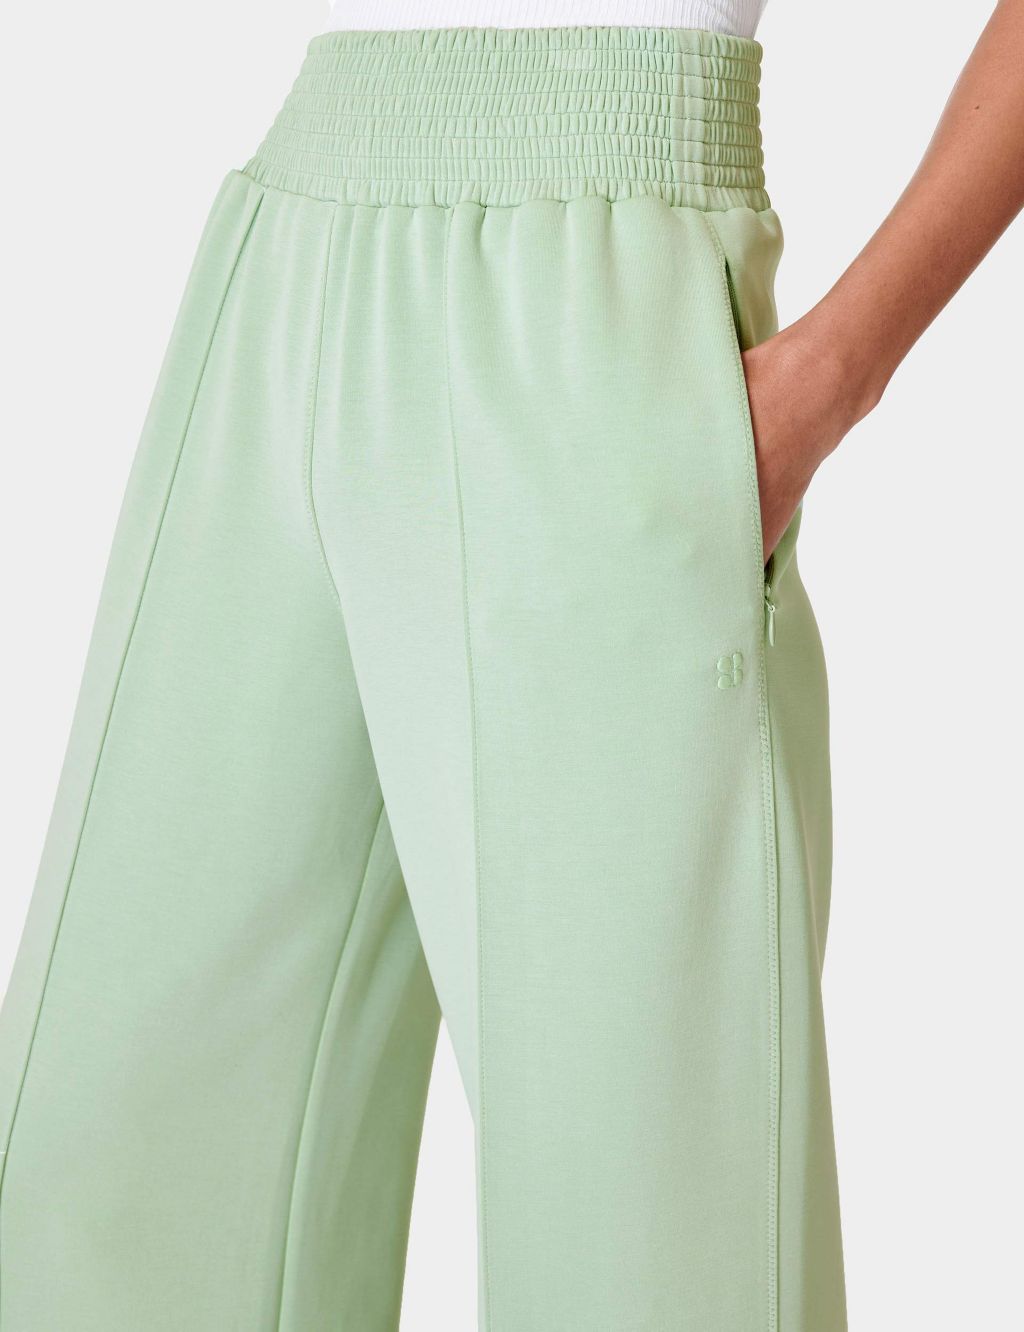 Sand Wash Cloudweight High Waisted Joggers image 5